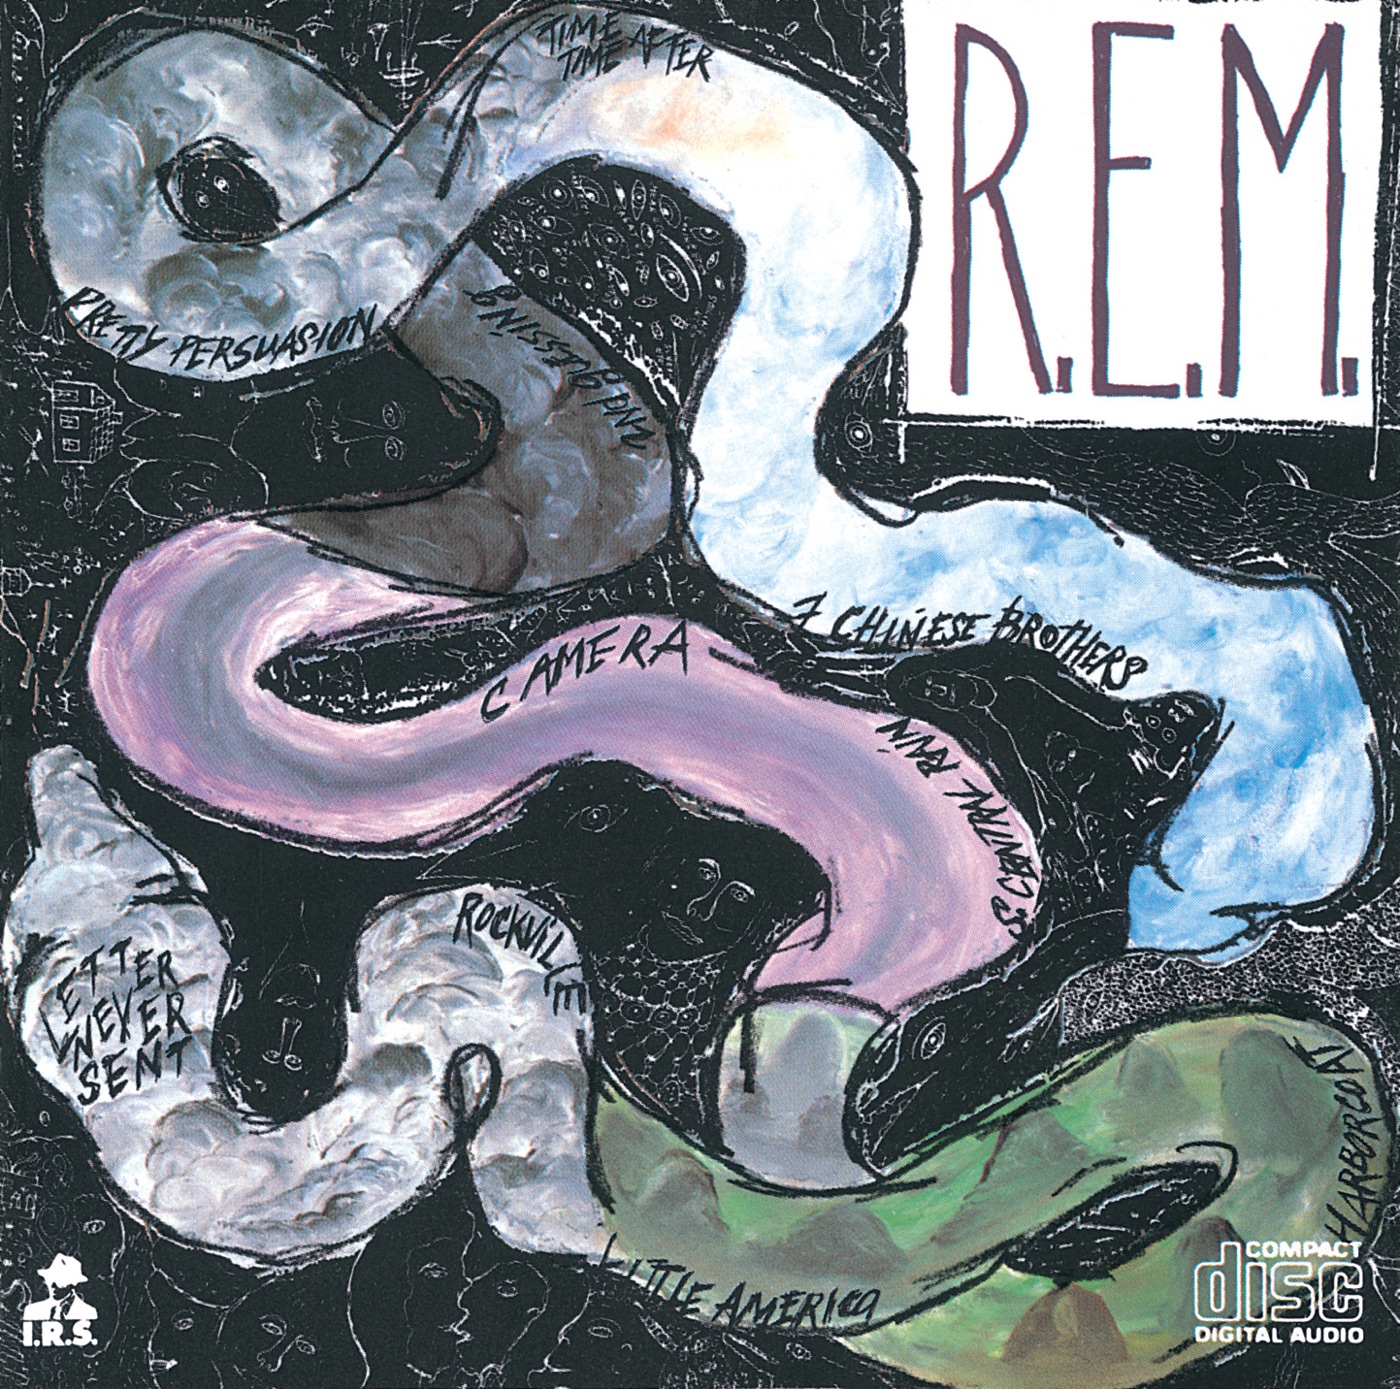 Reckoning by R.E.M.